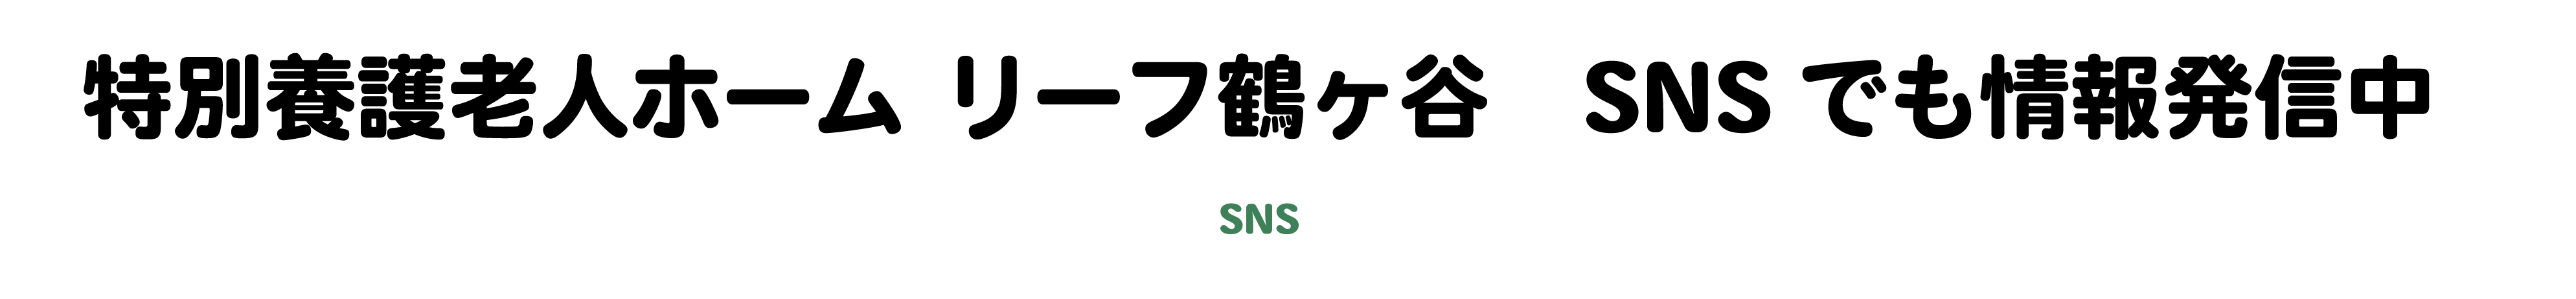 SNSでも情報発信中